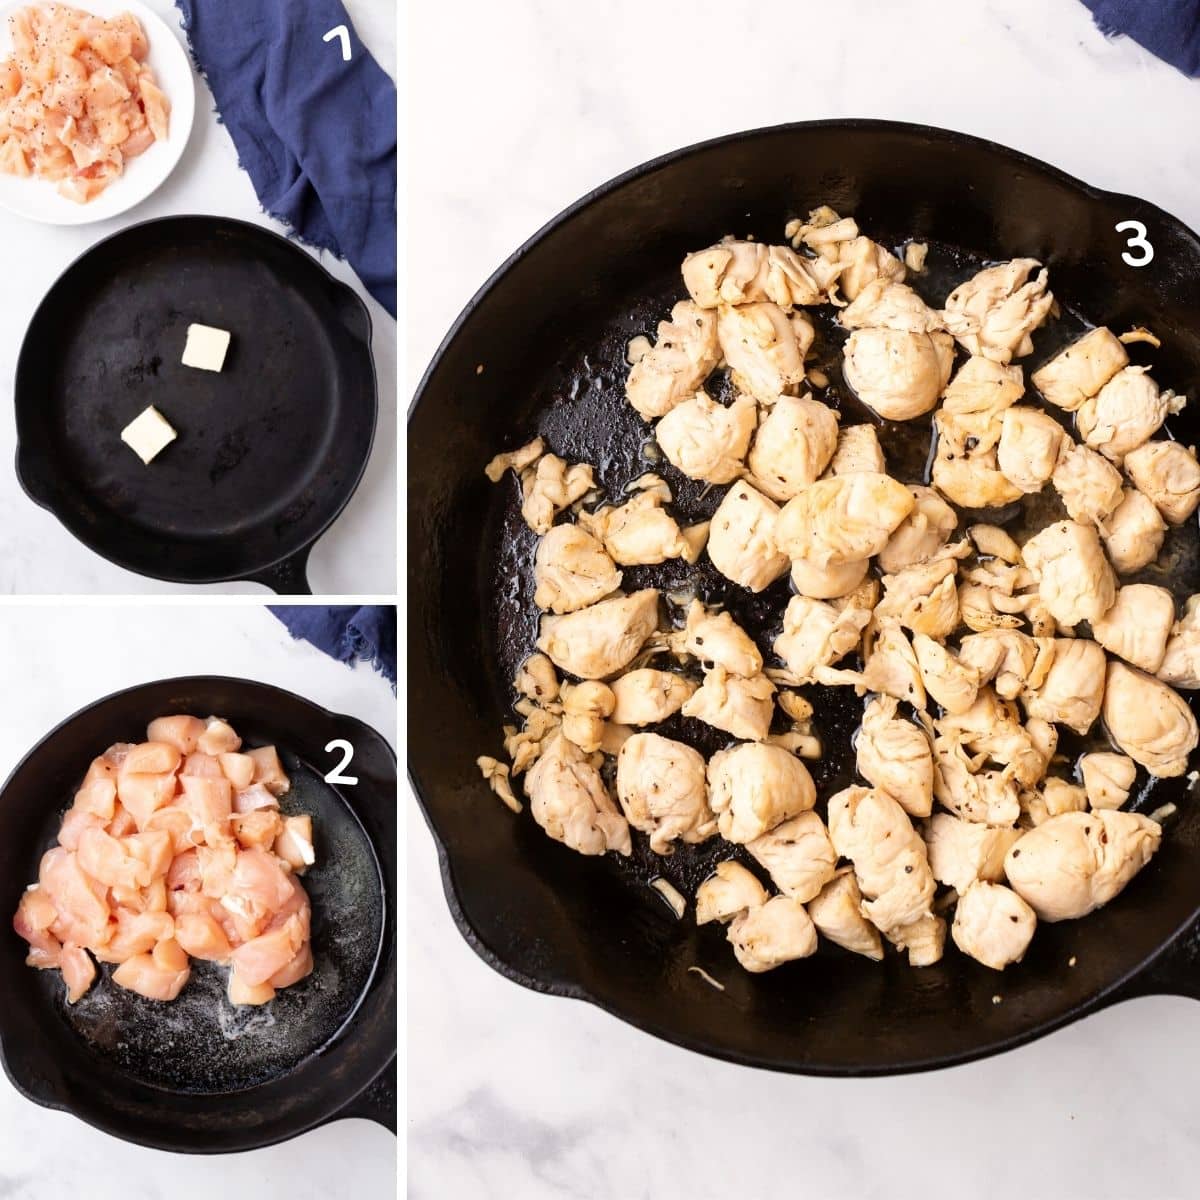 A collage of three images showing how to prepare the chicken to make this mashed potato dinner.